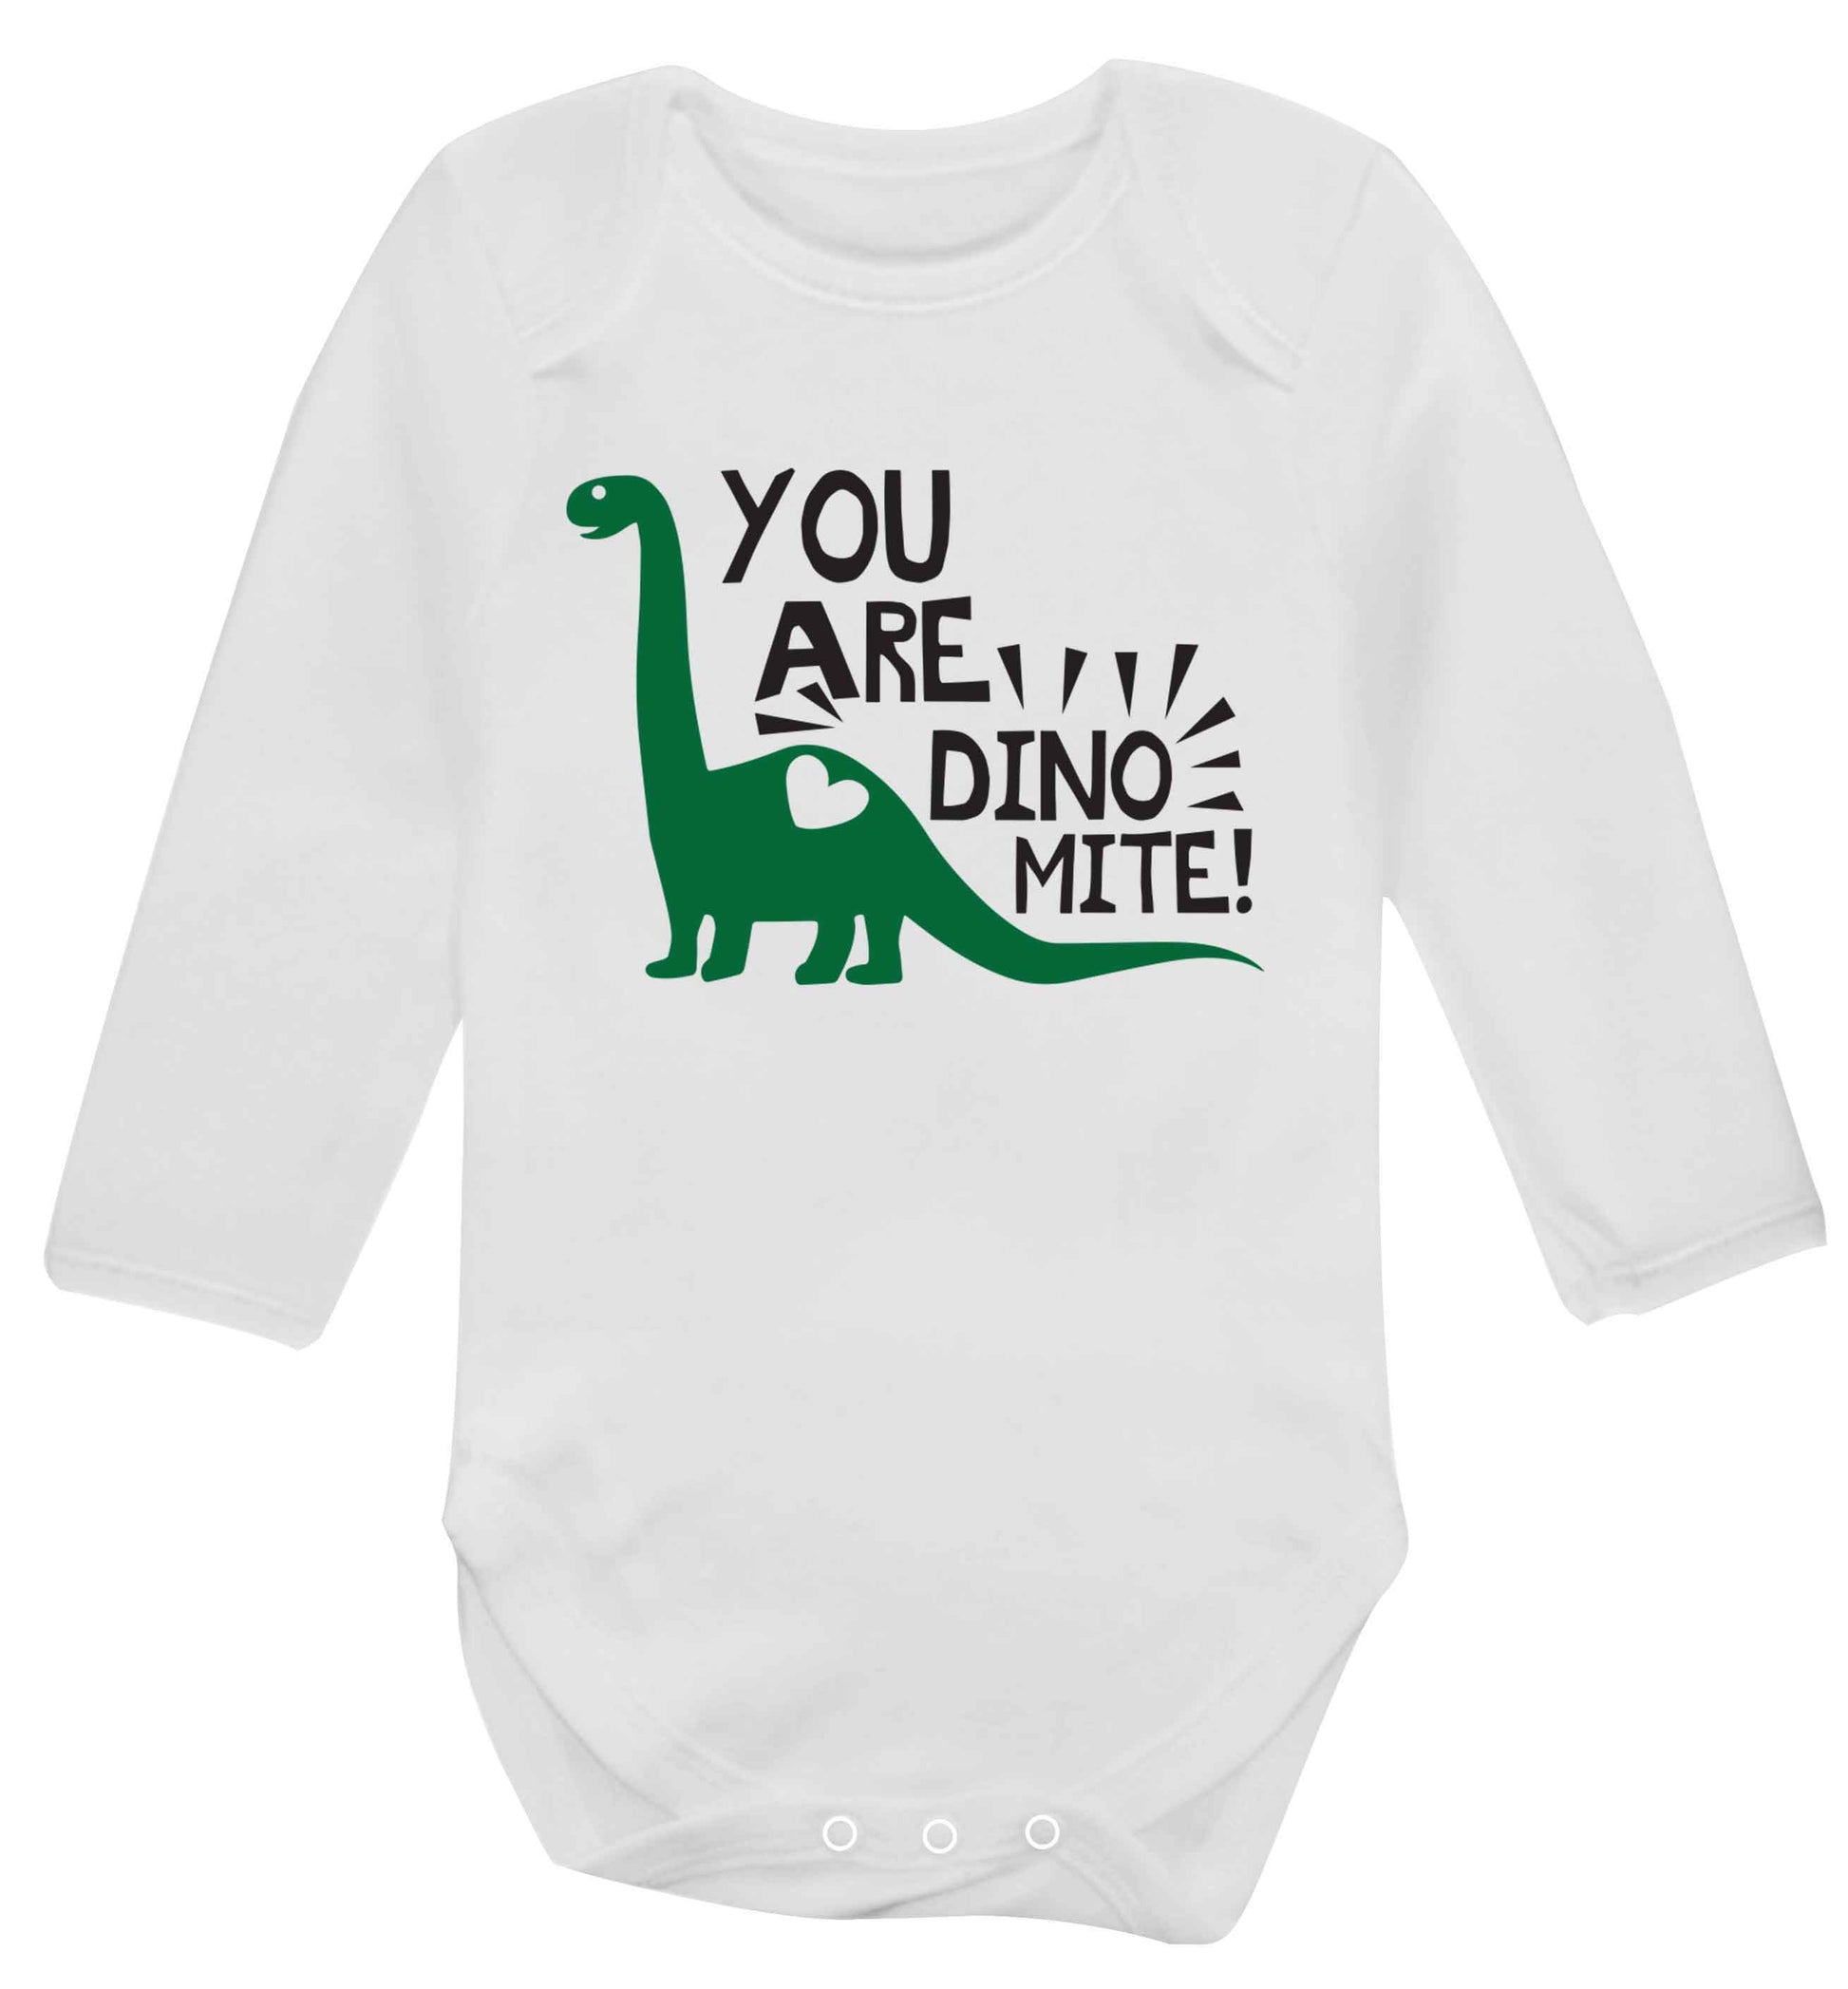 You are dinomite! Baby Vest long sleeved white 6-12 months